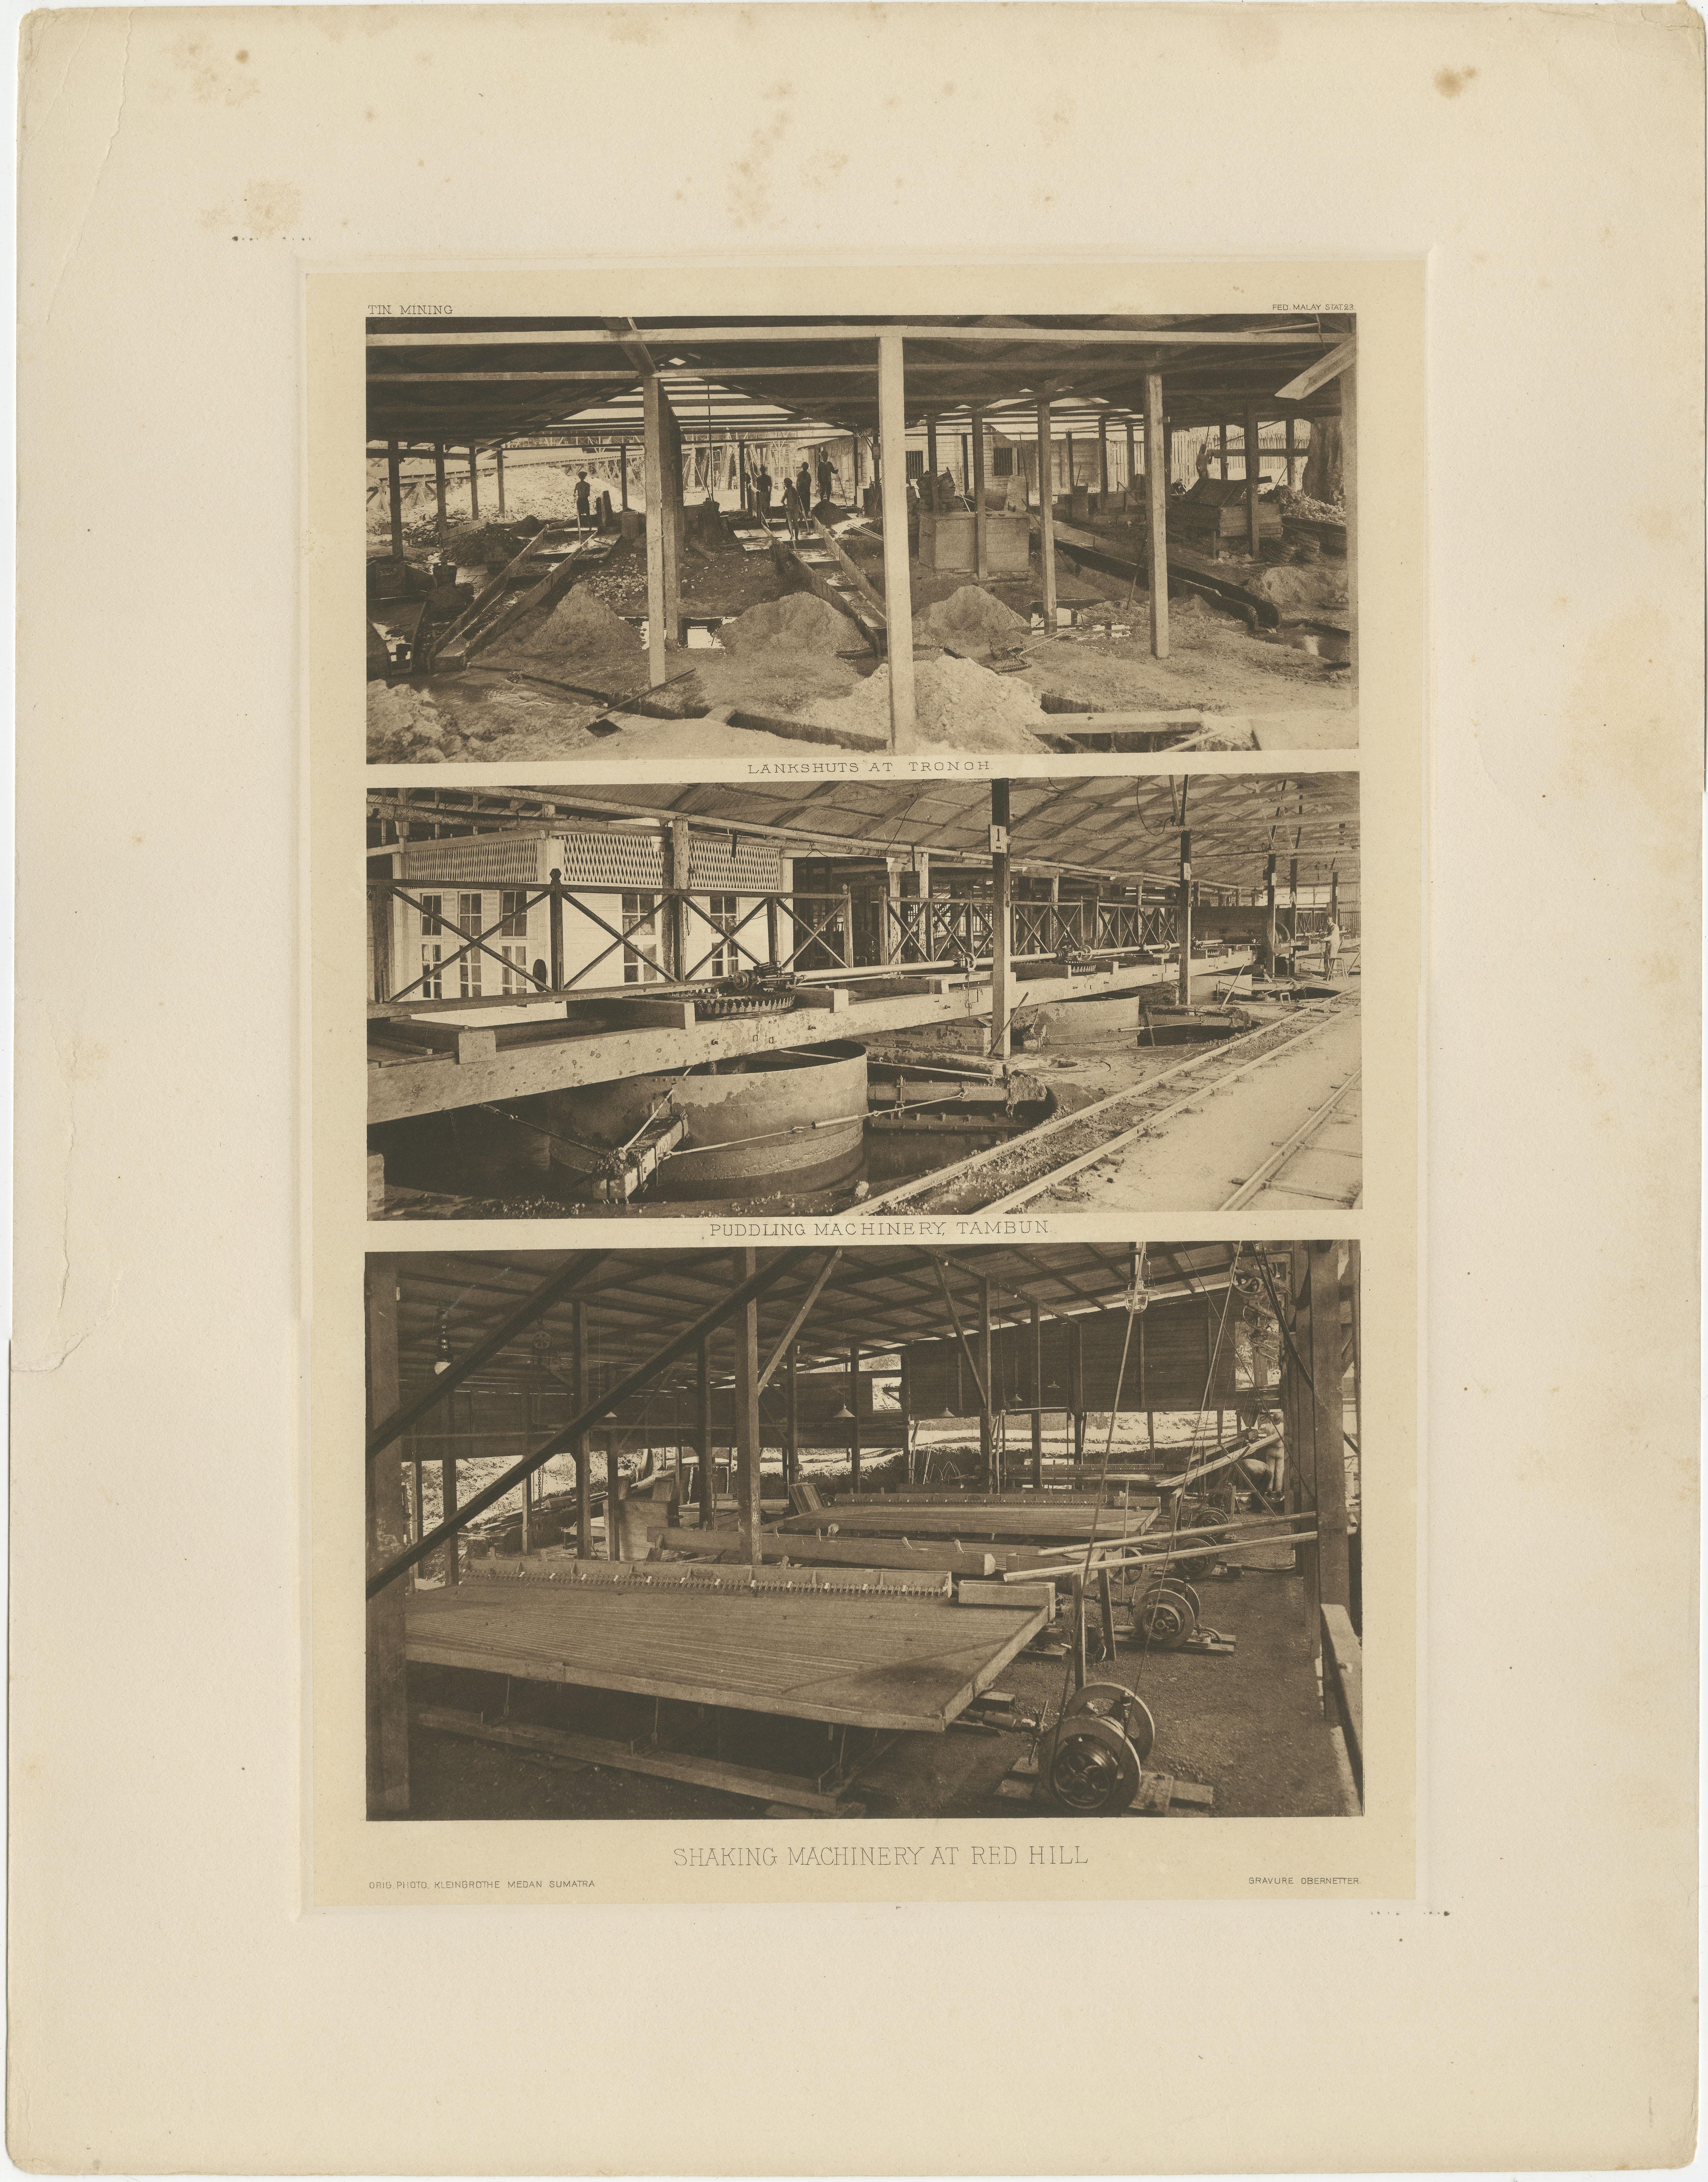 Three views of the Mining Industry in Malaysia around 1907. 

1. Lankshuts at Tronoh, Perak 
2. Puddling Machinery, Tambun in Sabah
3. Shaking Machinery at Red Hill

This heliogravures are on one leaf from the extremely rare boxed Malay